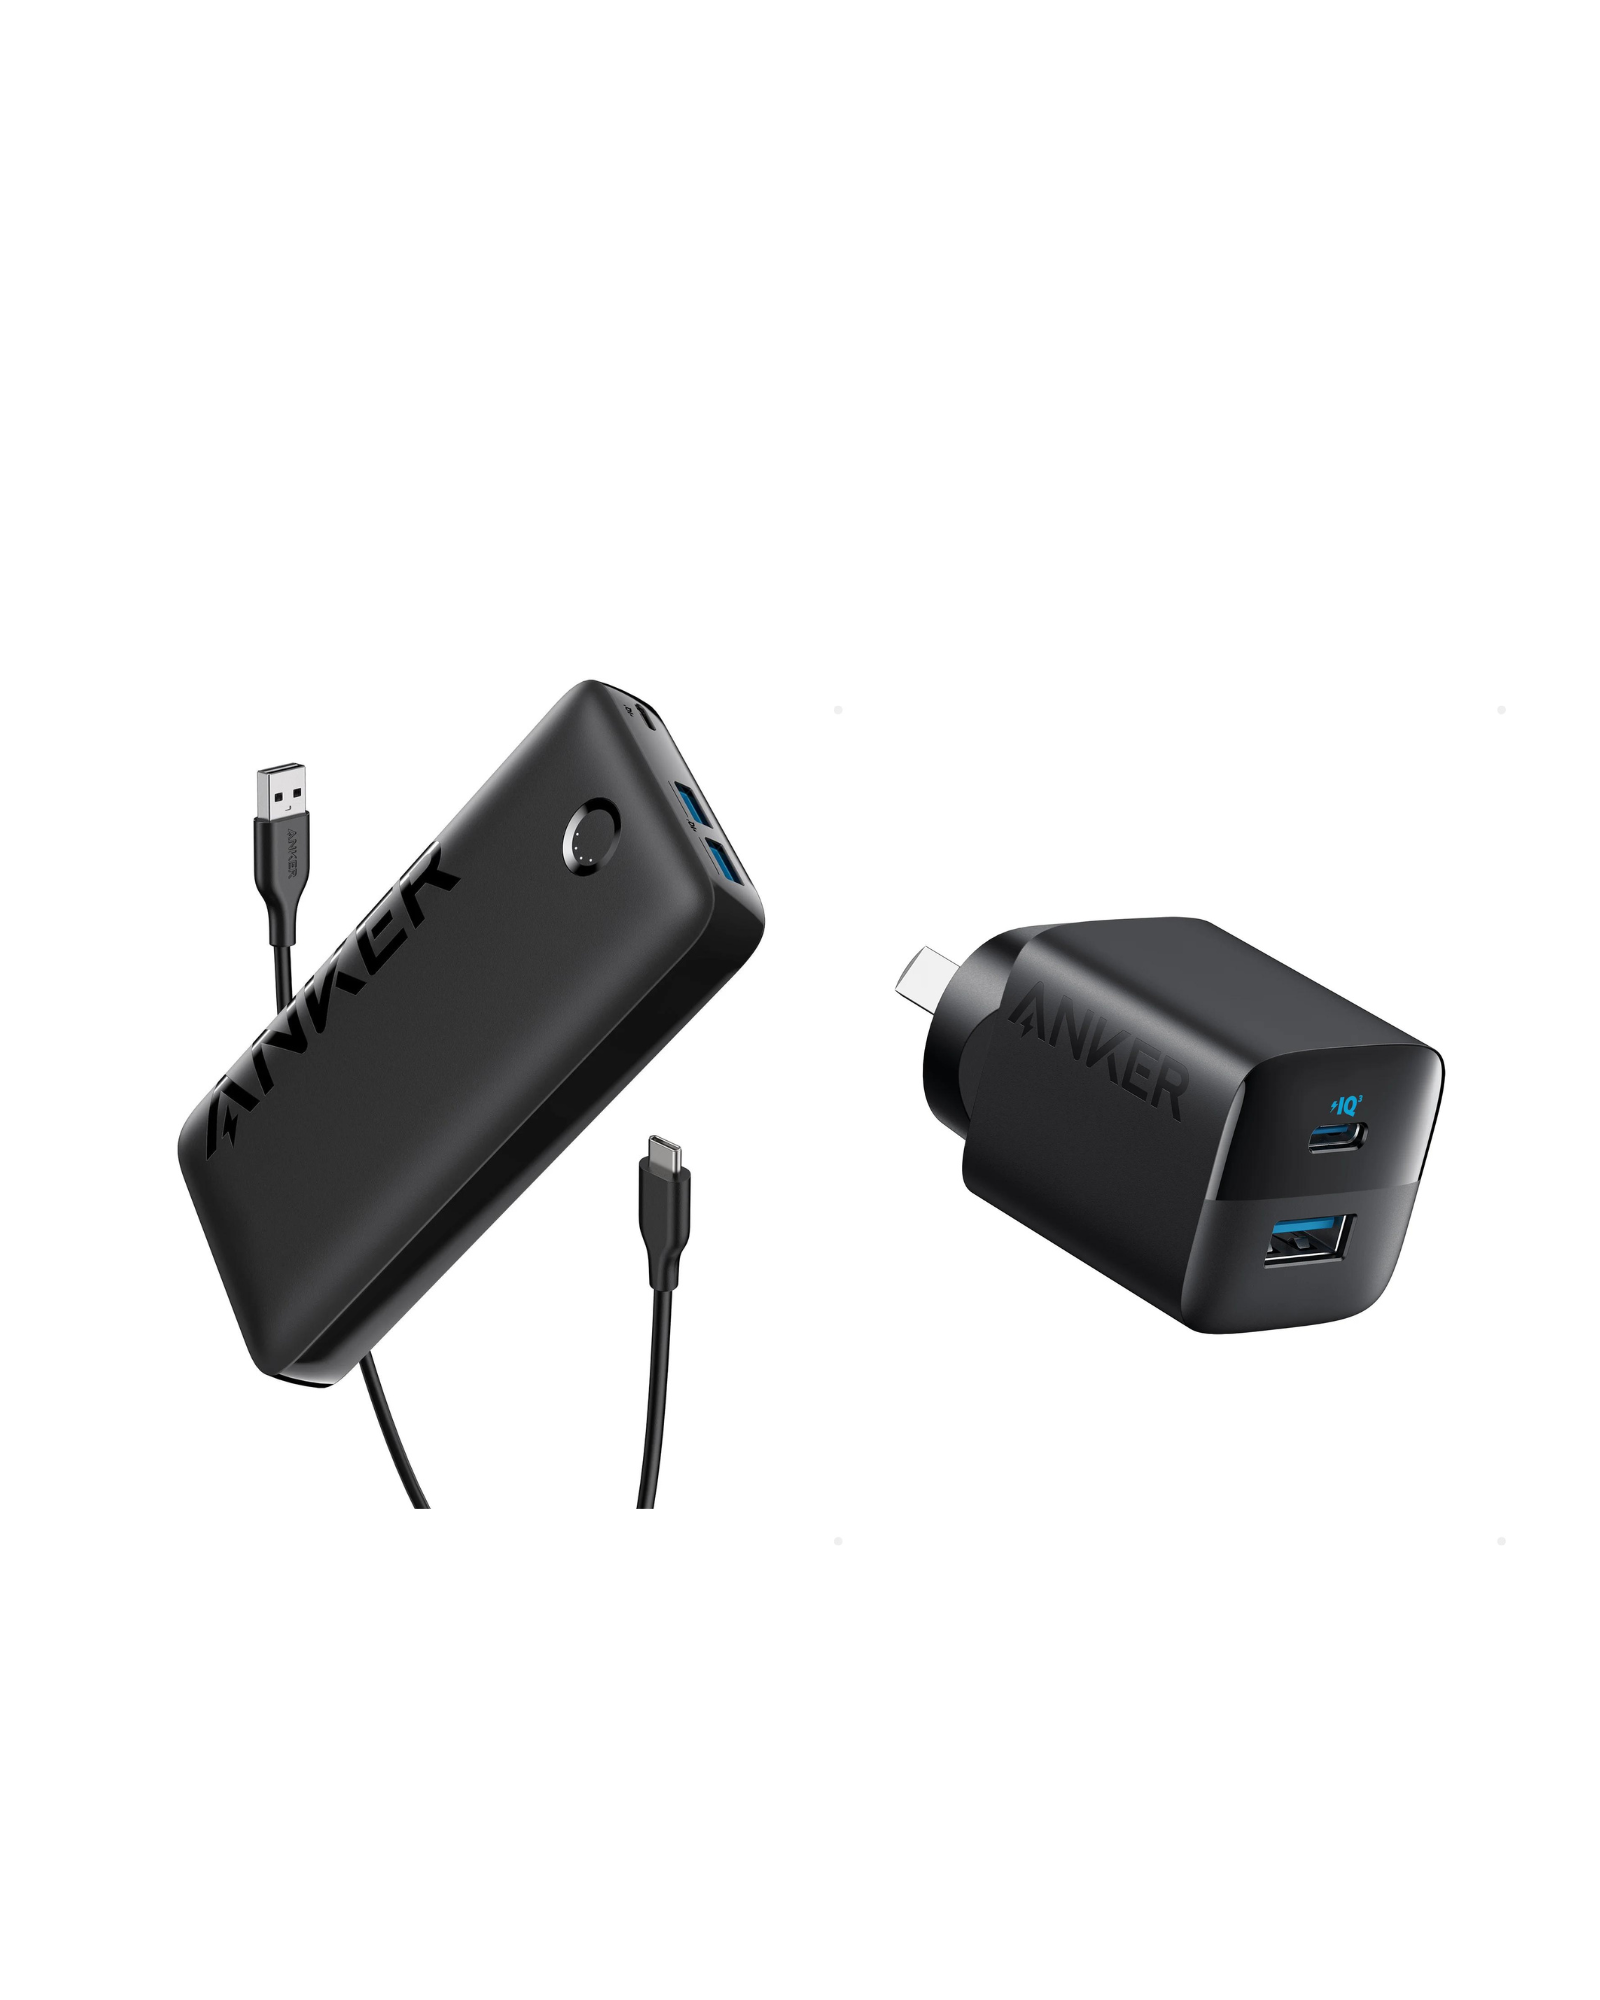 Anker 335 Power Bank (PowerCore 20K) and Anker <b>323</b> Charger (33W)